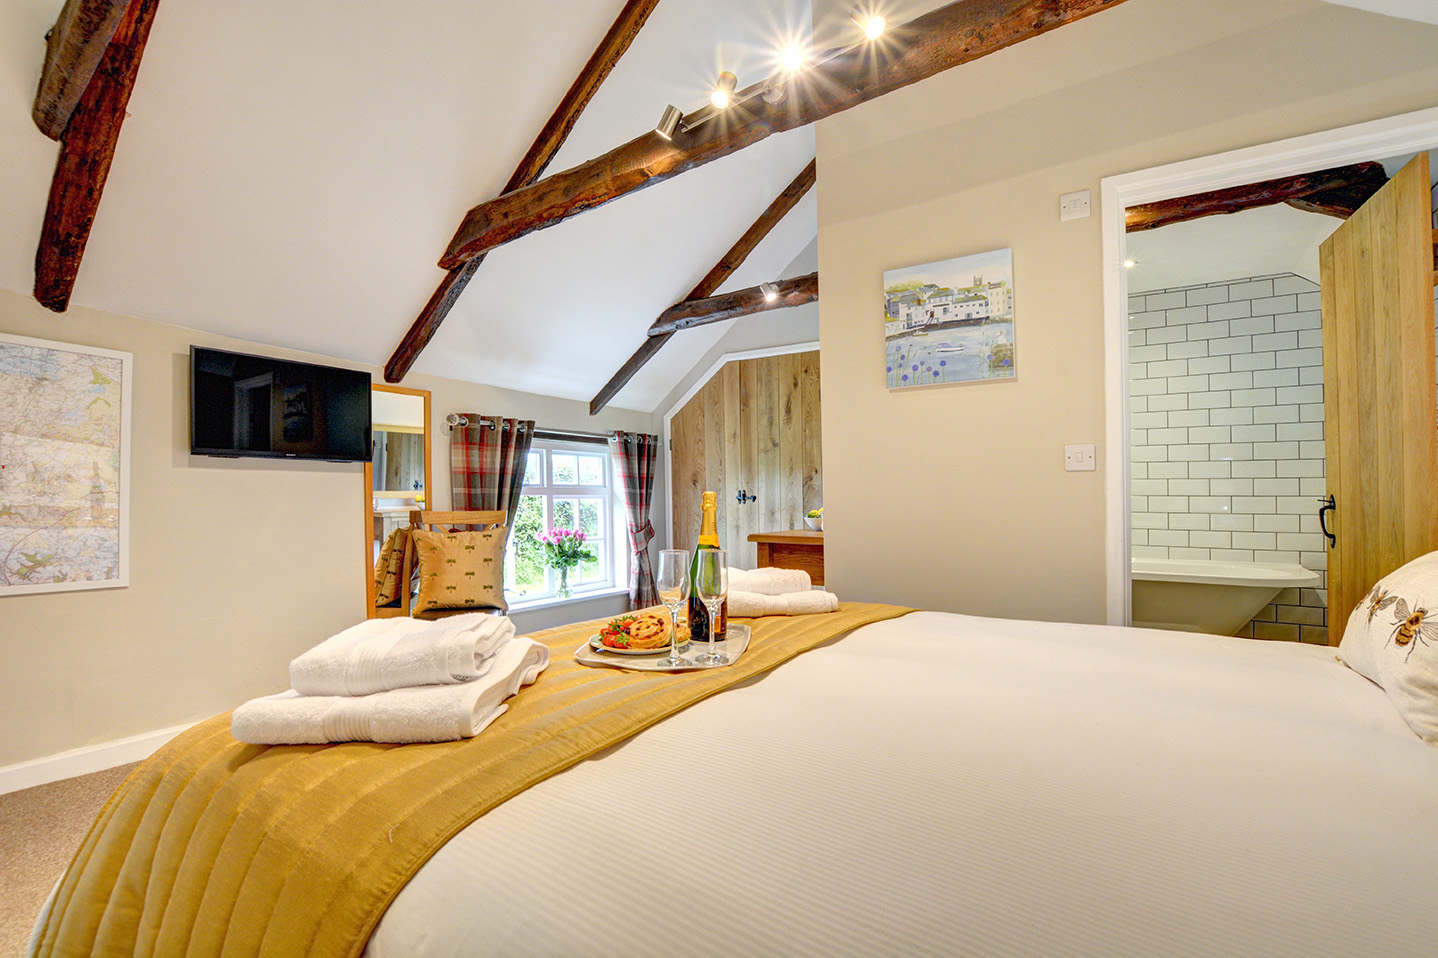 The bedroom of The Linney self catering cottage converted barn at Penrose Burden holiday cottages in Cornwall 03.jpg